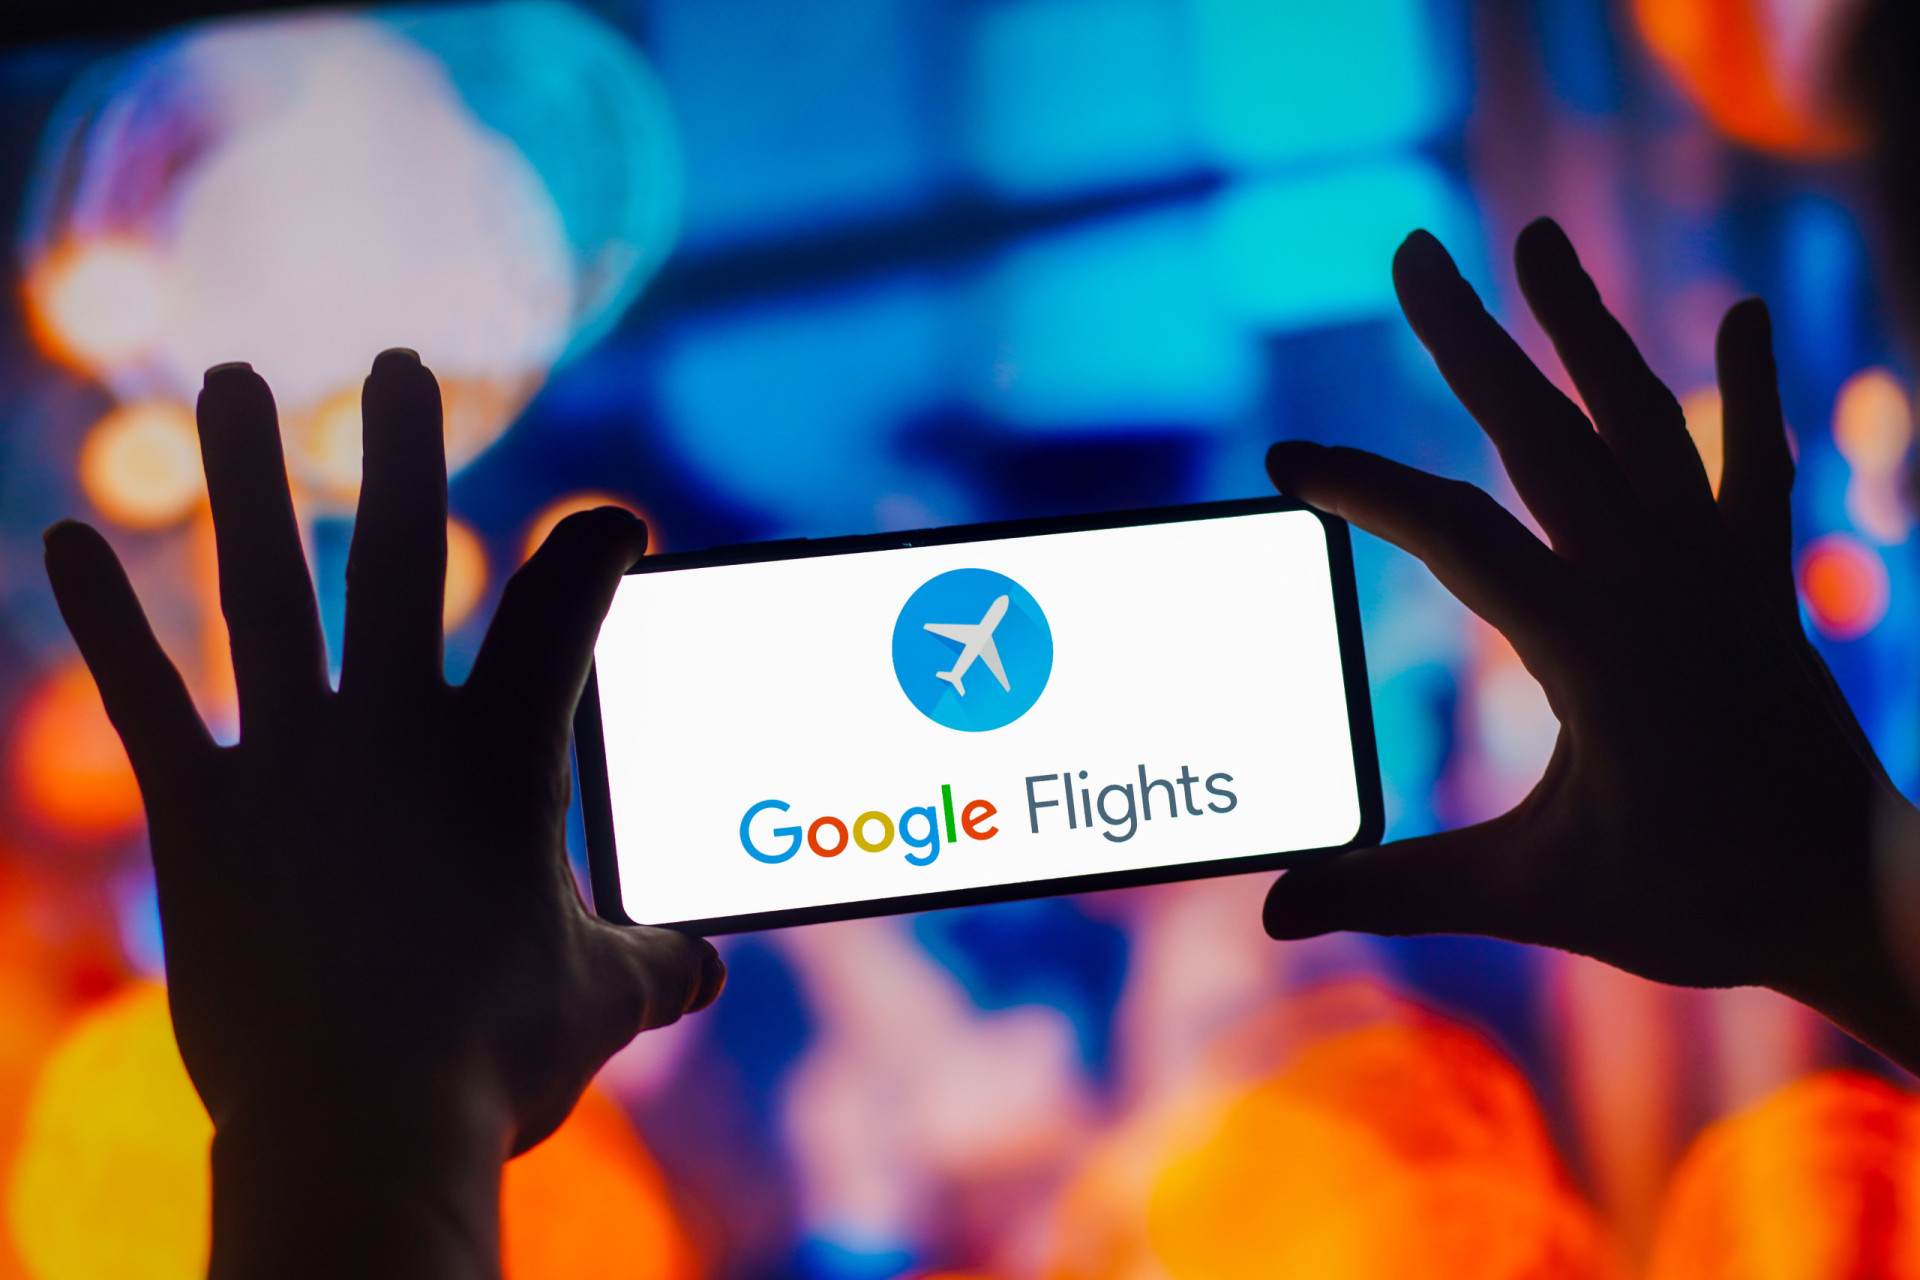 <p>Before we jump in, we should mention that these cities were compiled from Google Flights search results in the United States. In fact, these results reflect the most sought-after cities between June 1 and August 31: the perfect summer period!</p><p><a href="https://www.msn.com/en-us/community/channel/vid-7xx8mnucu55yw63we9va2gwr7uihbxwc68fxqp25x6tg4ftibpra?cvid=94631541bc0f4f89bfd59158d696ad7e">Follow us and access great exclusive content every day</a></p>